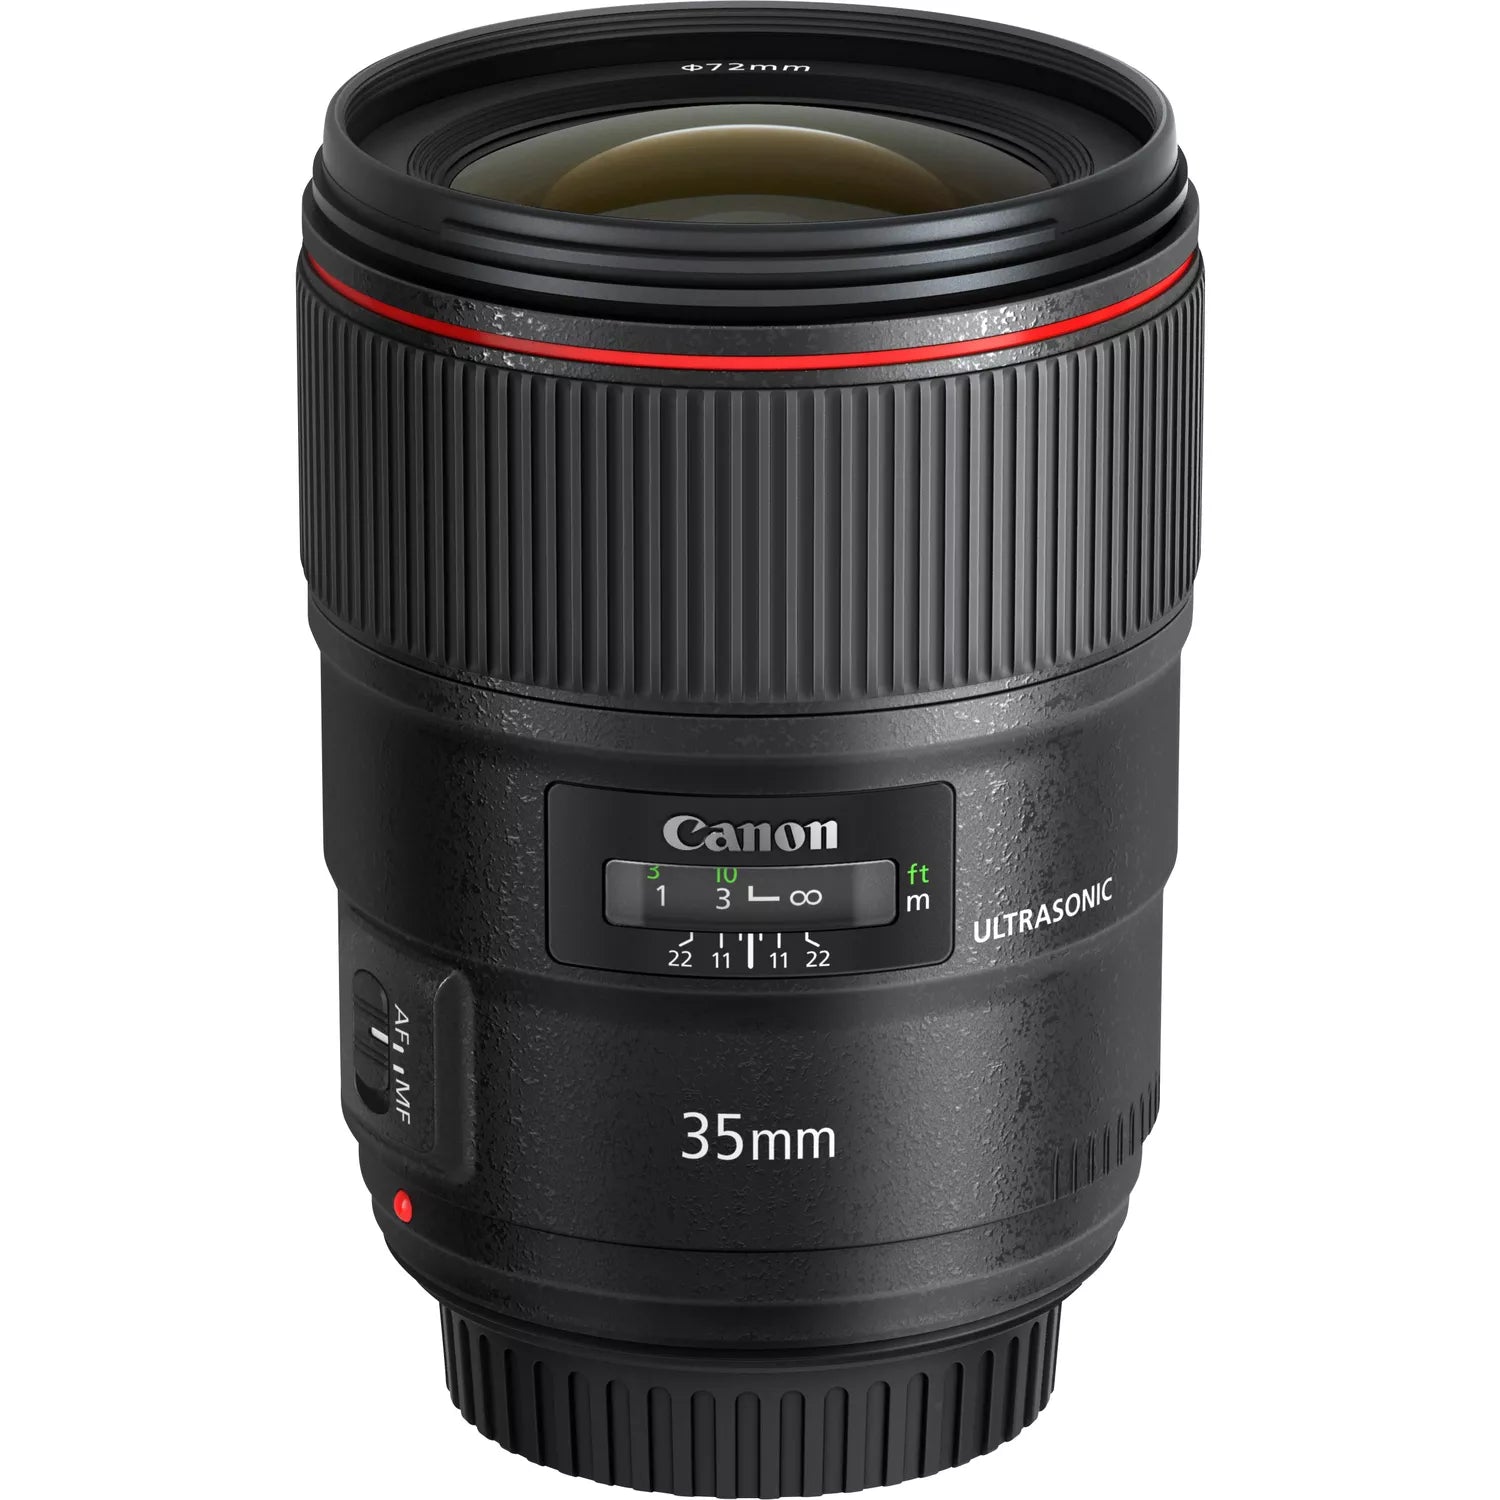 Canon EF 35mm f1.4L II USM Wide Angle Lens - Product Photo 5 - Top Down View